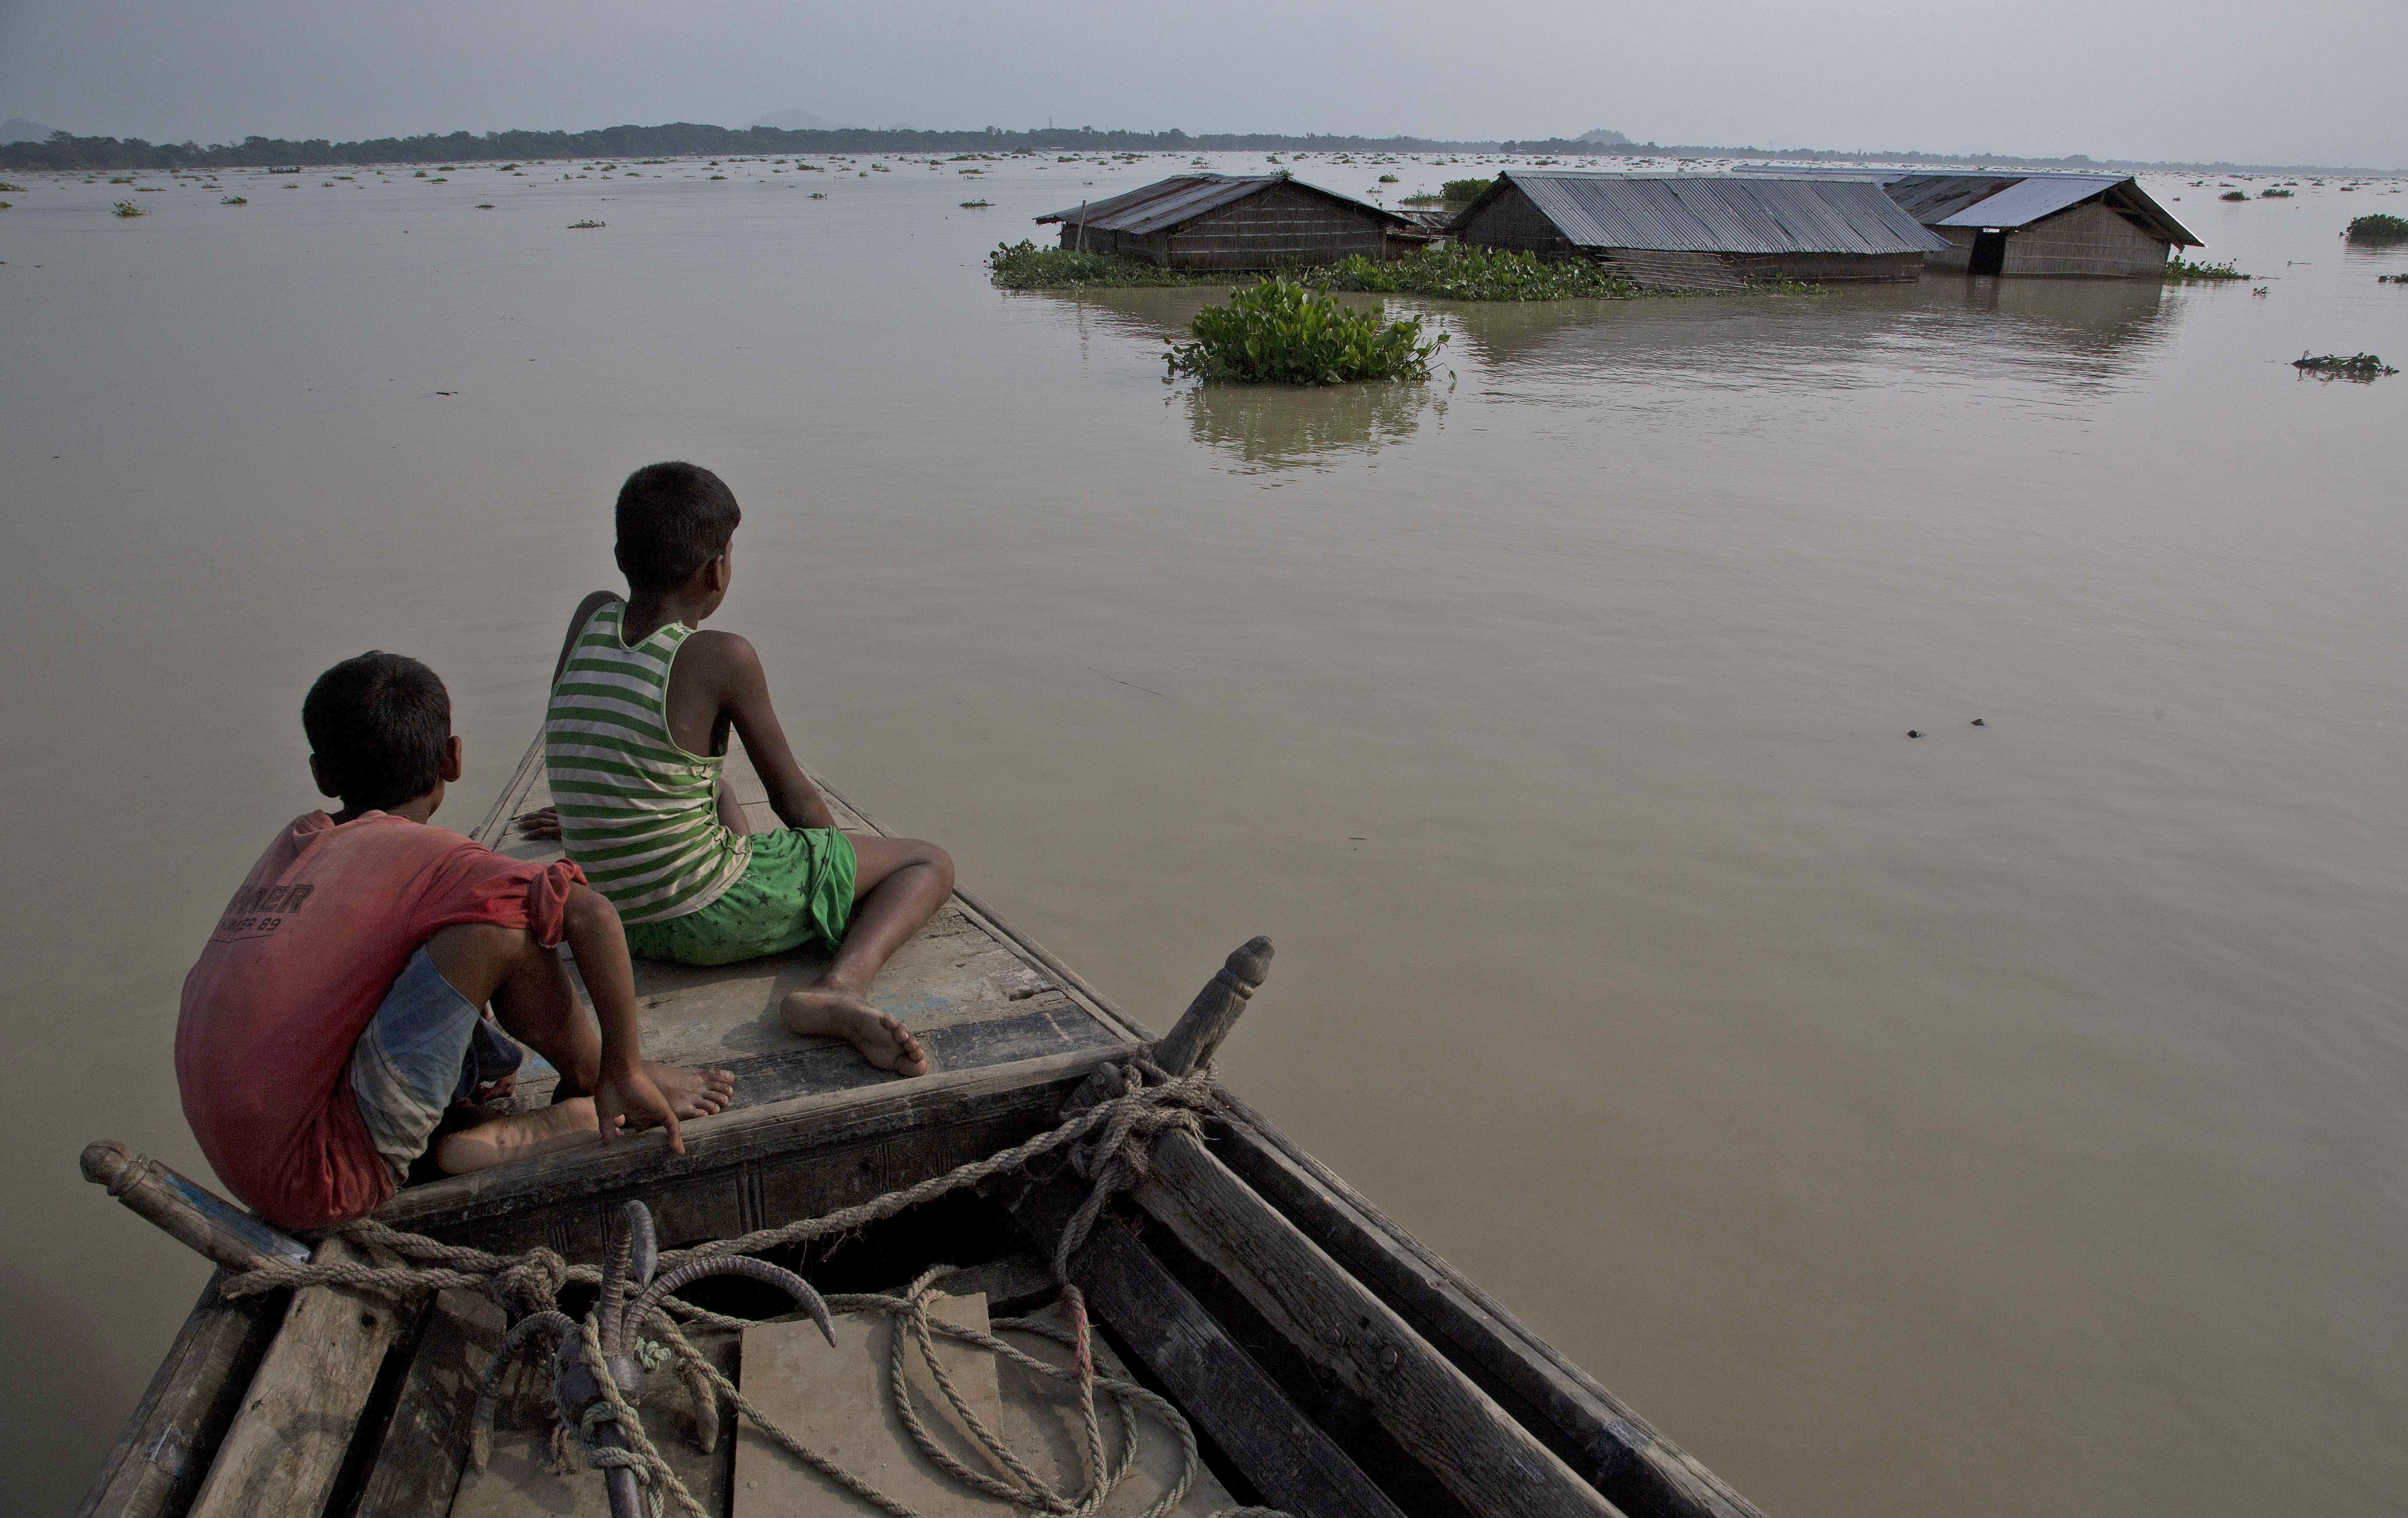 A boat offers refuge, with homes under floodwaters in Morigaon district, in the northeastern Indian state of Assam, on August 15. Heavy monsoon rains this year have unleashed landslides and floods, killing hundreds and displacing millions more across northern India, southern Nepal and Bangladesh. Photo: AP